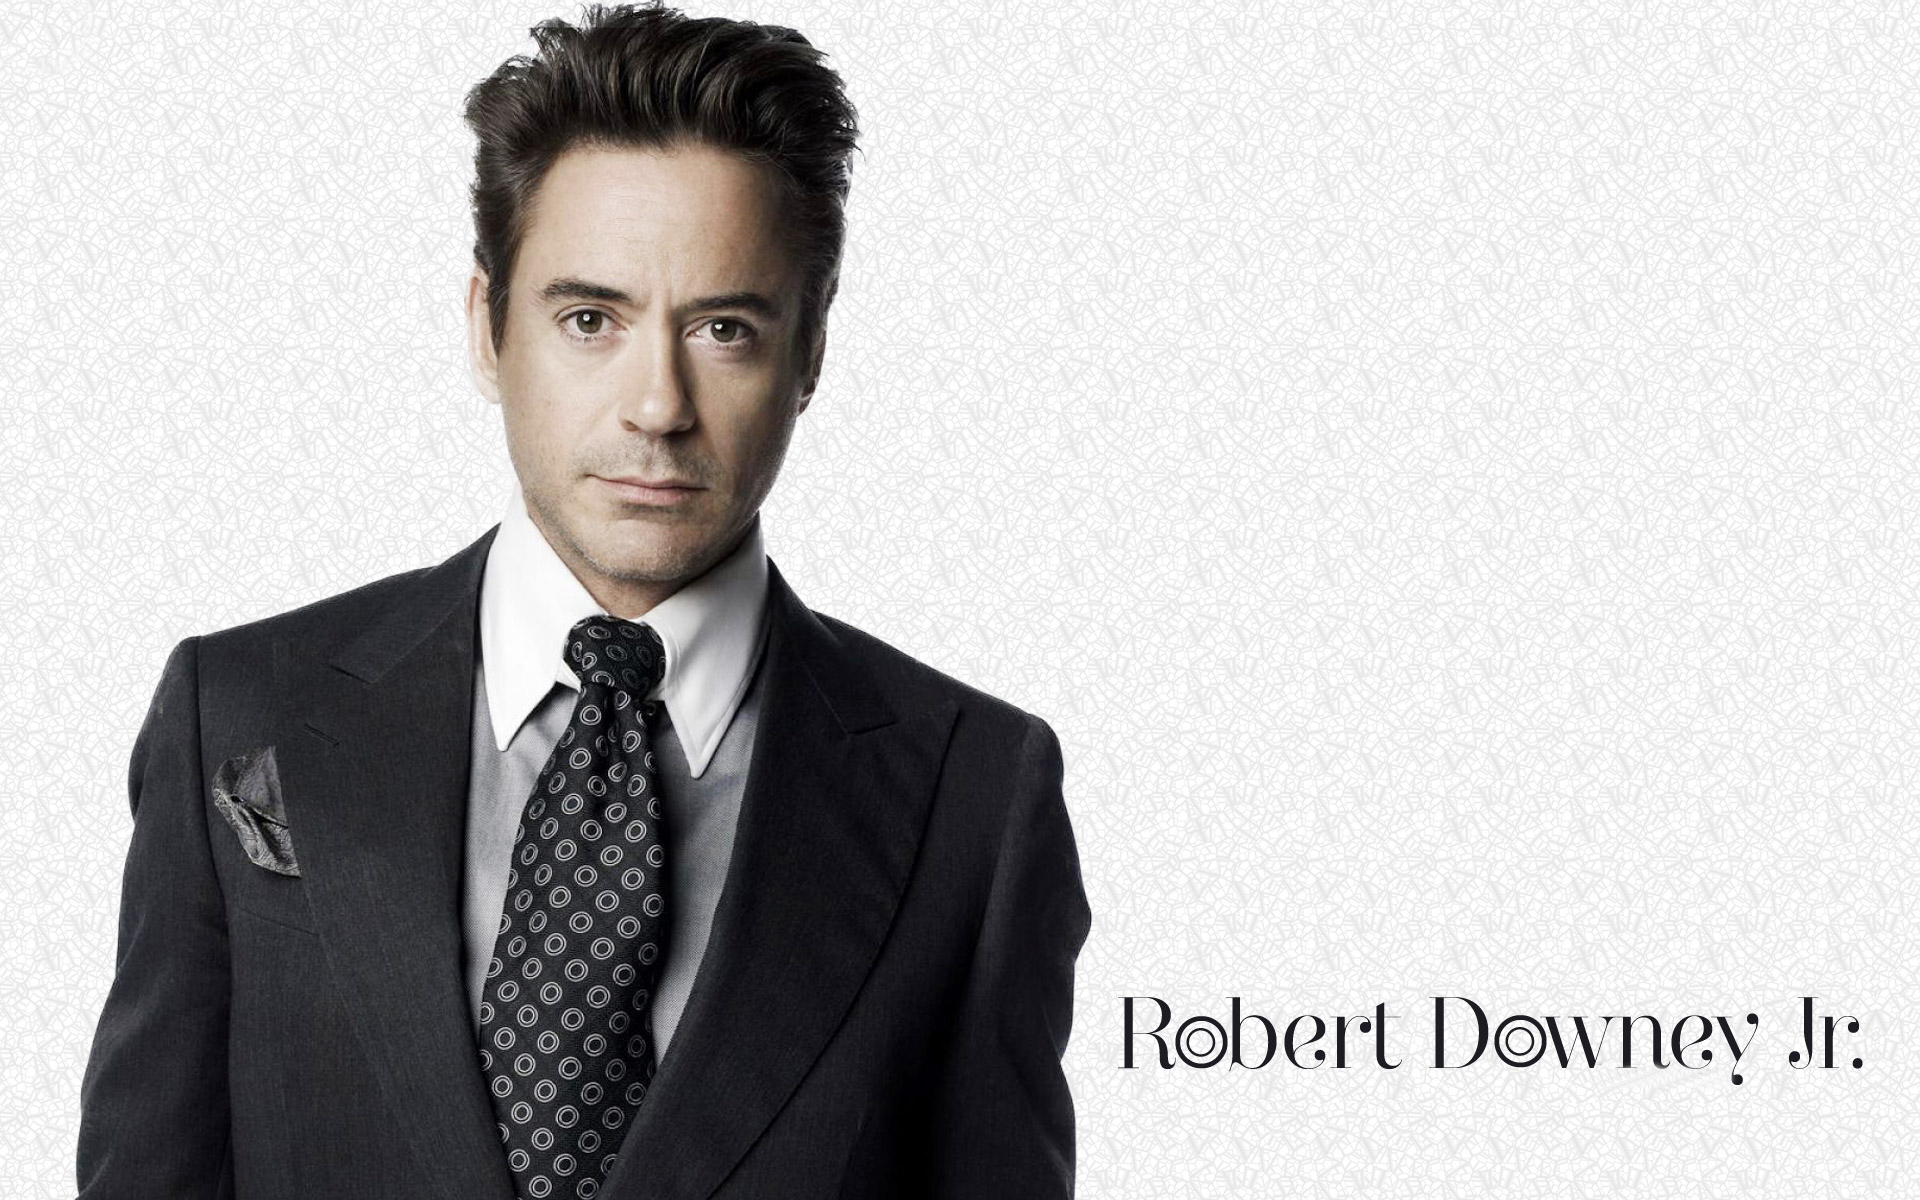 Robert Downey Jr Wallpapers High Resolution and Quality Download